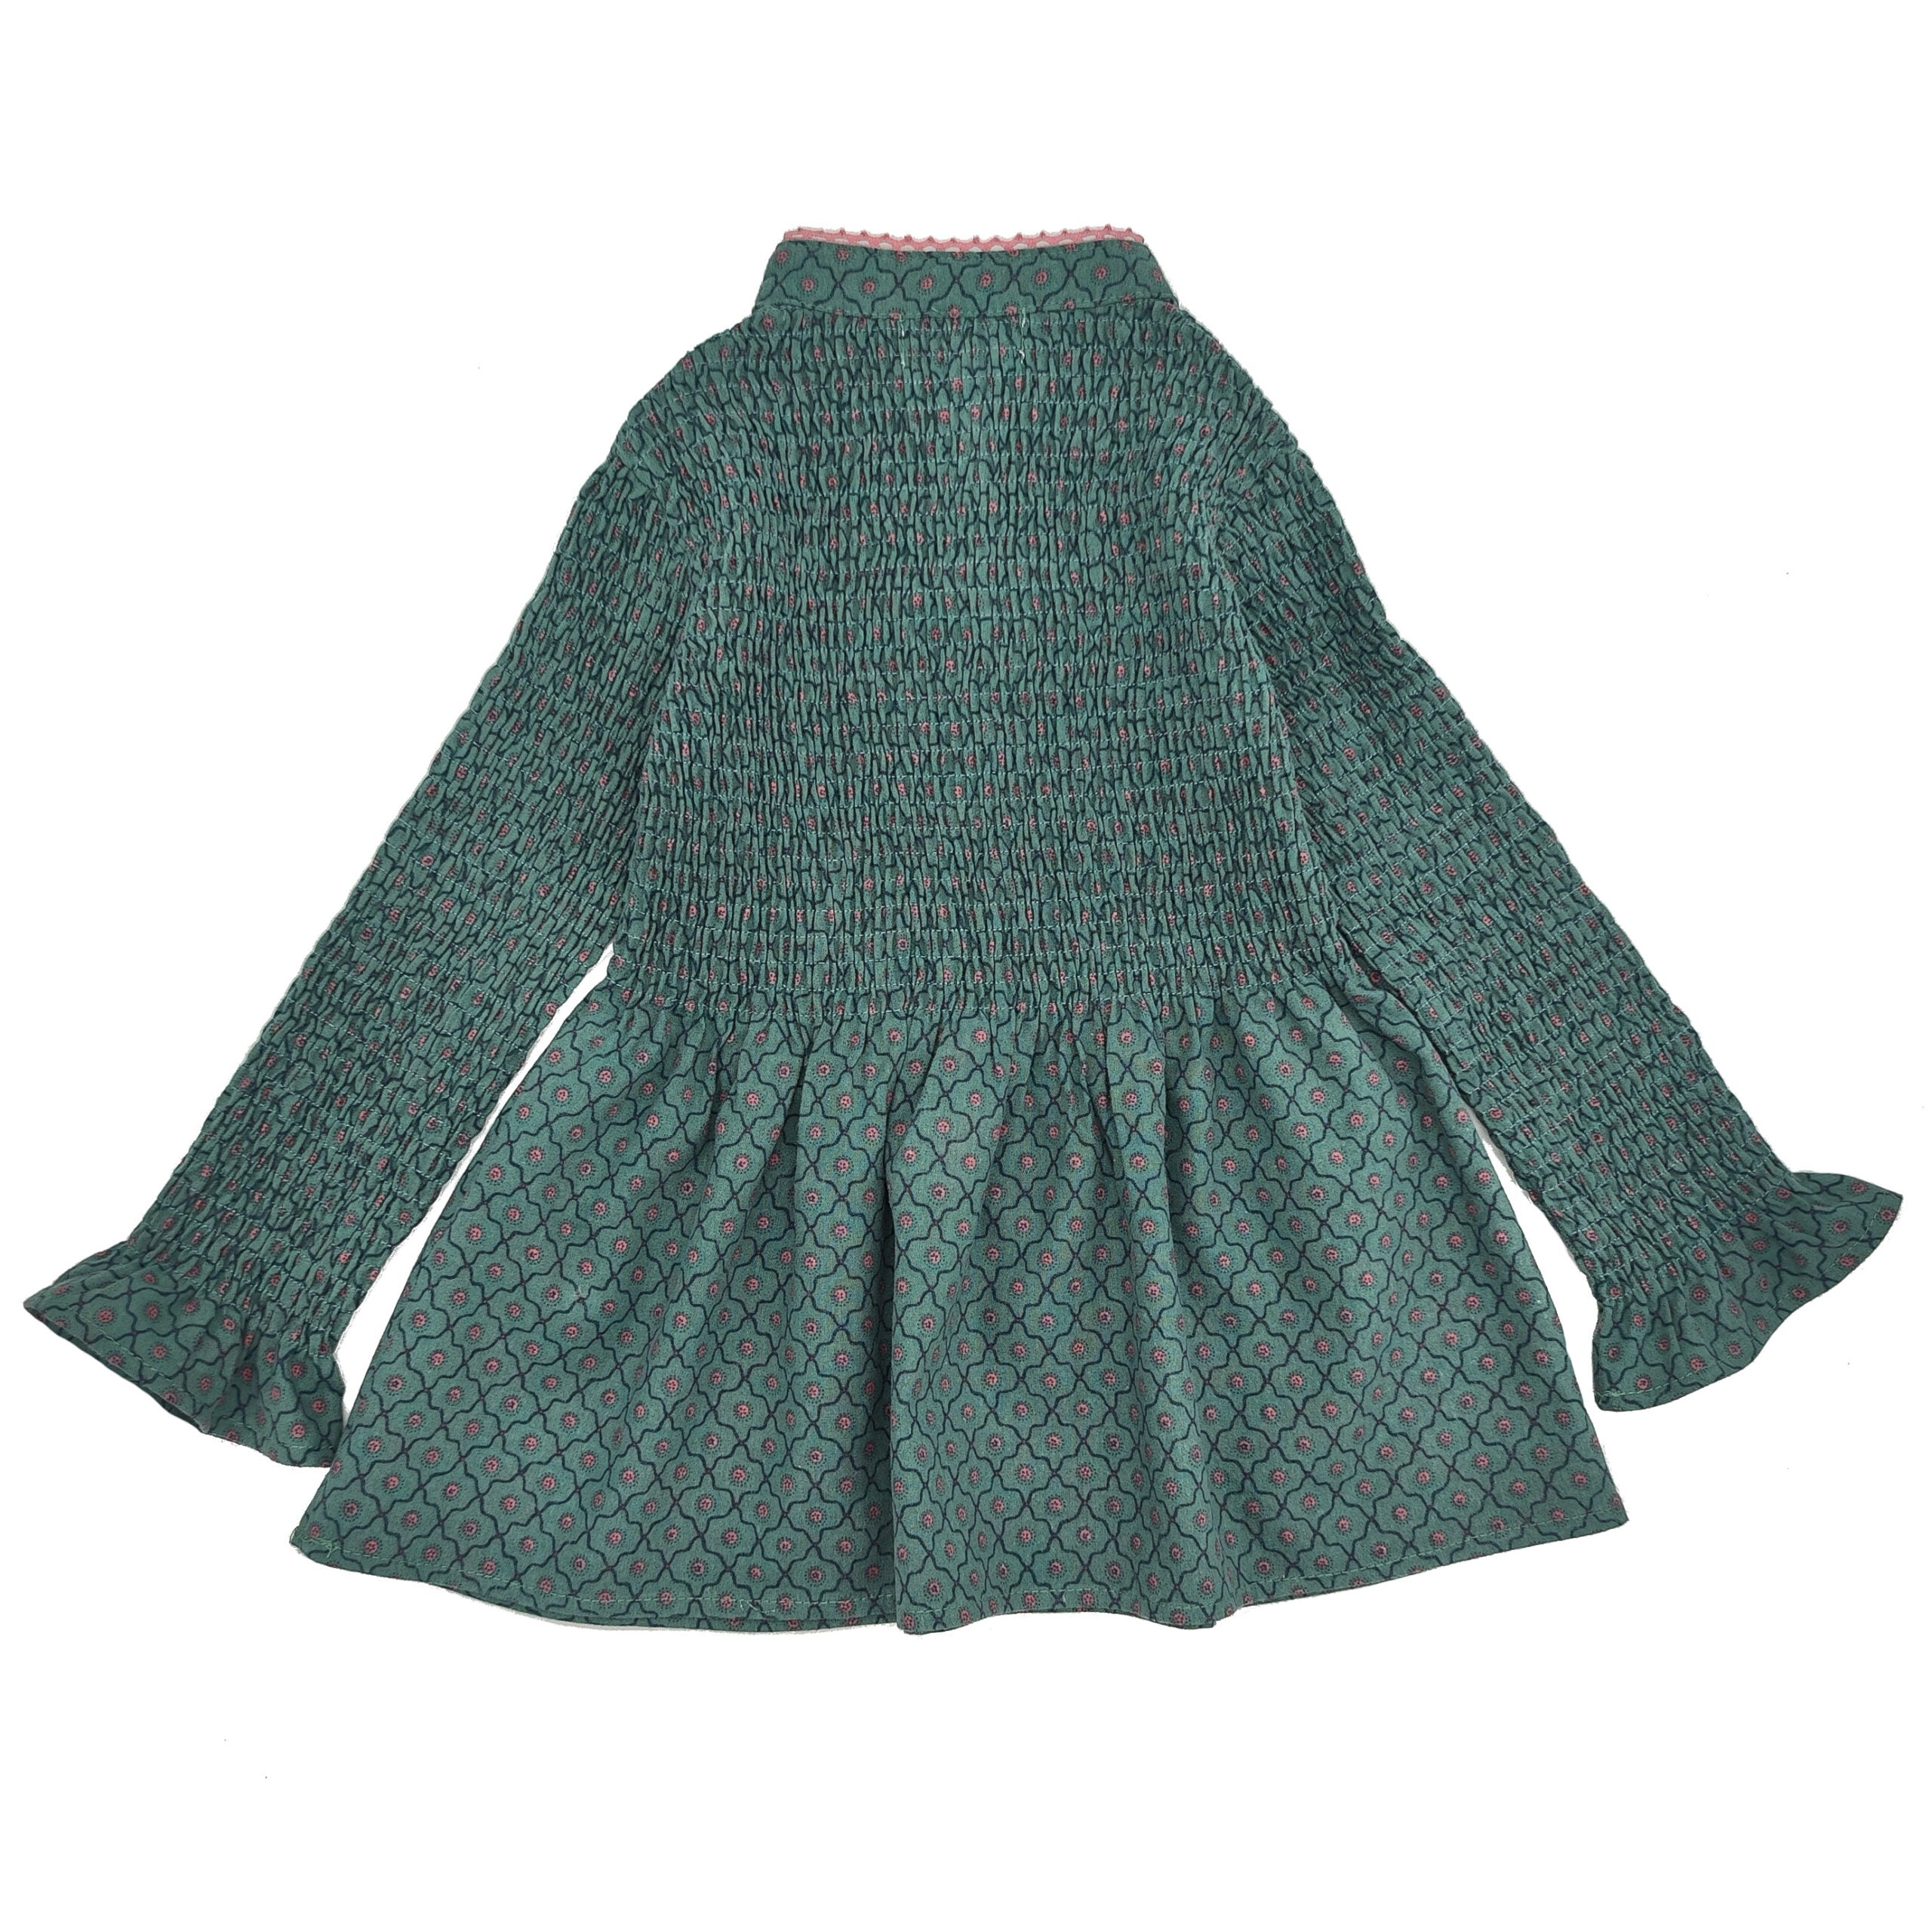 Girl Green & Pink Hand Smocked Blouse